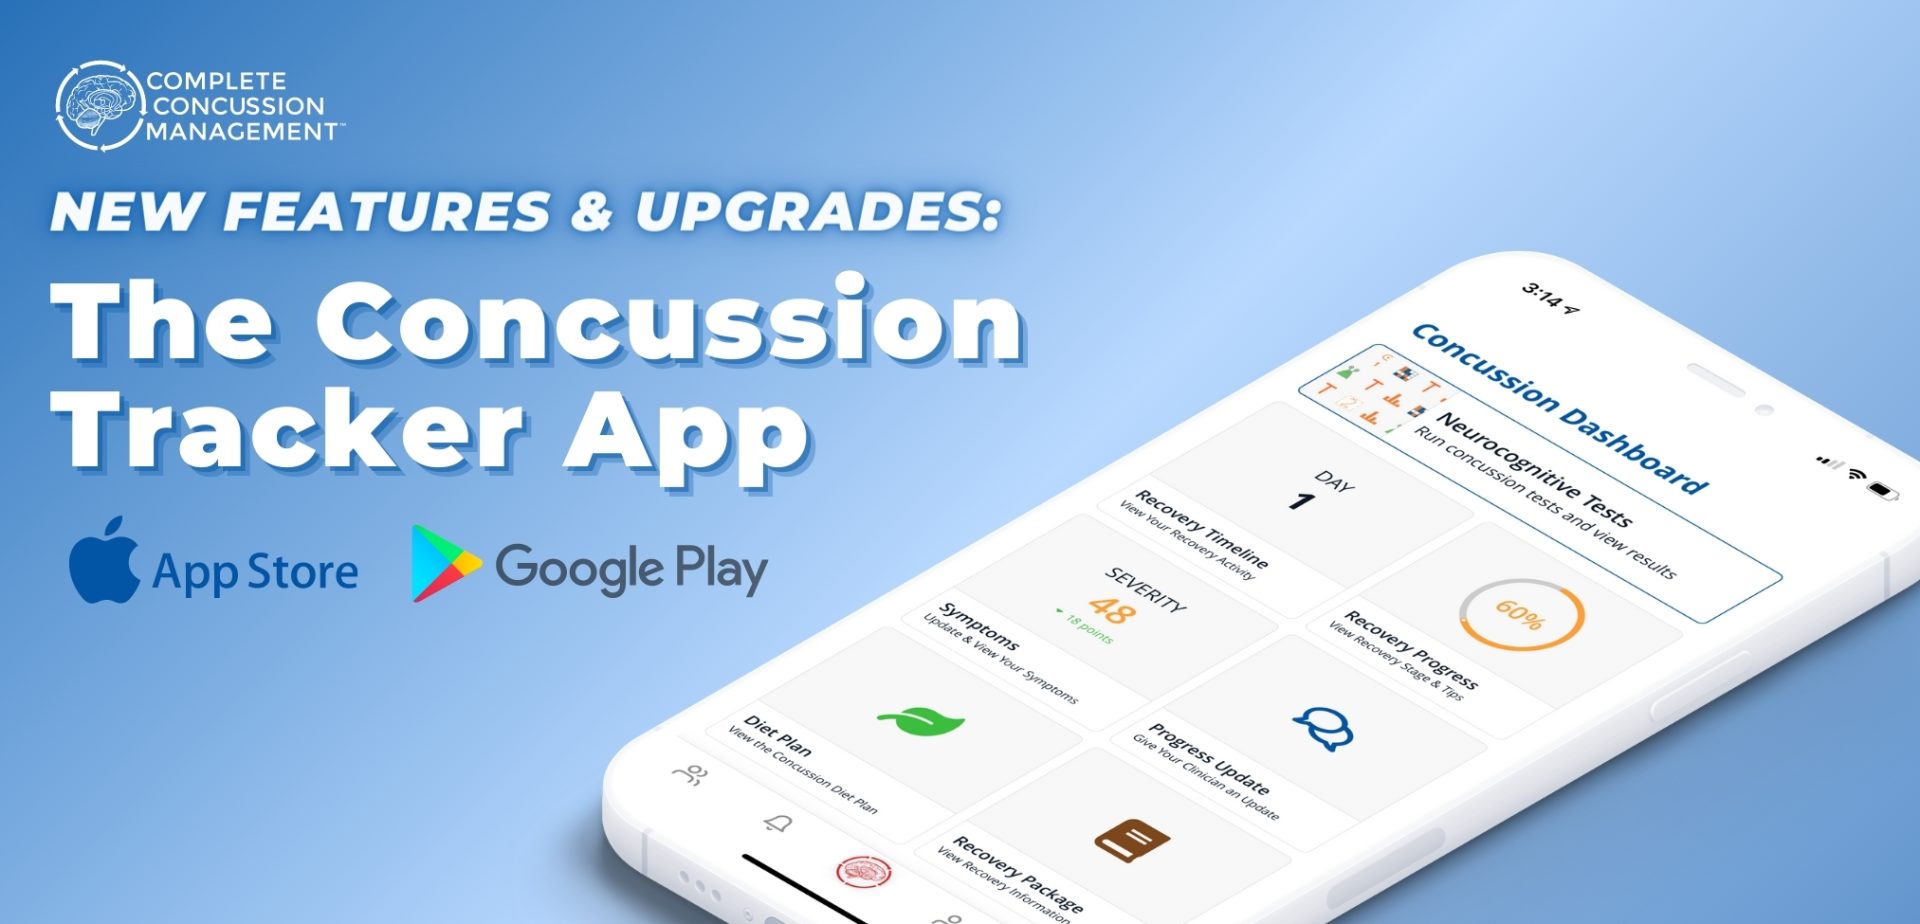 CCMI’s Concussion Tracker App Adds Powerful New Test Feature!